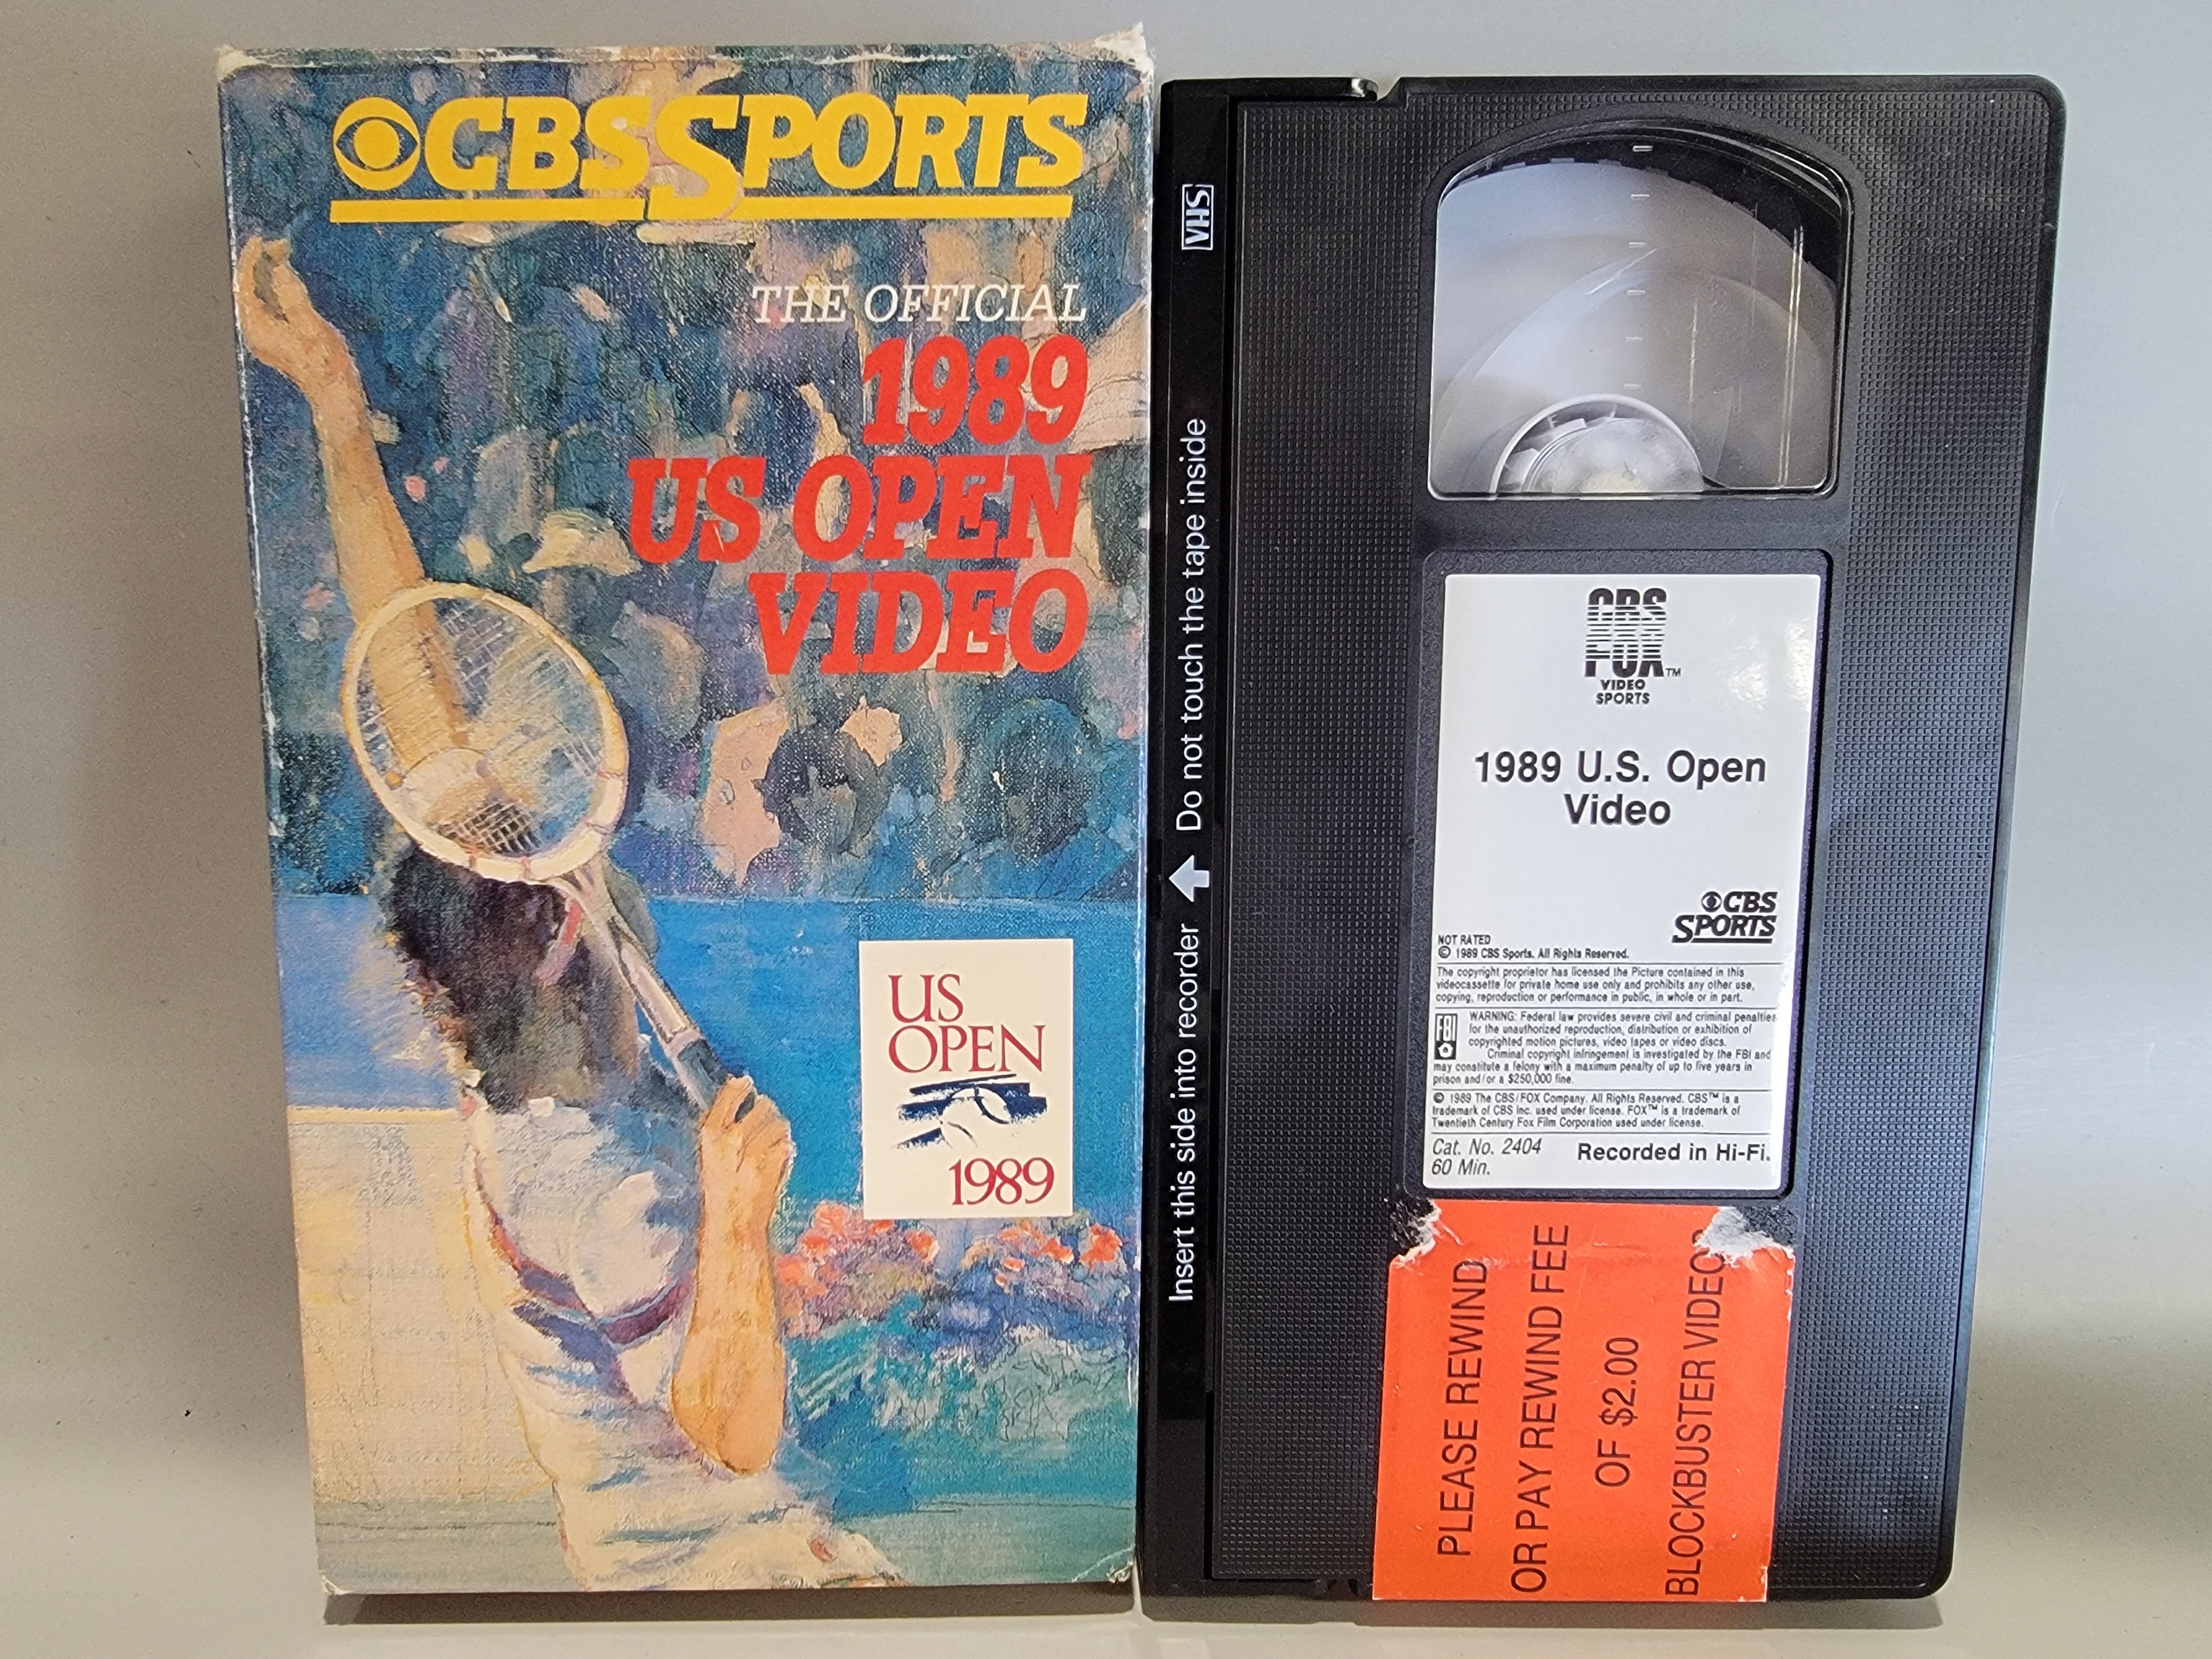 THE OFFICIAL 1989 US OPEN VIDEO VHS [USED]